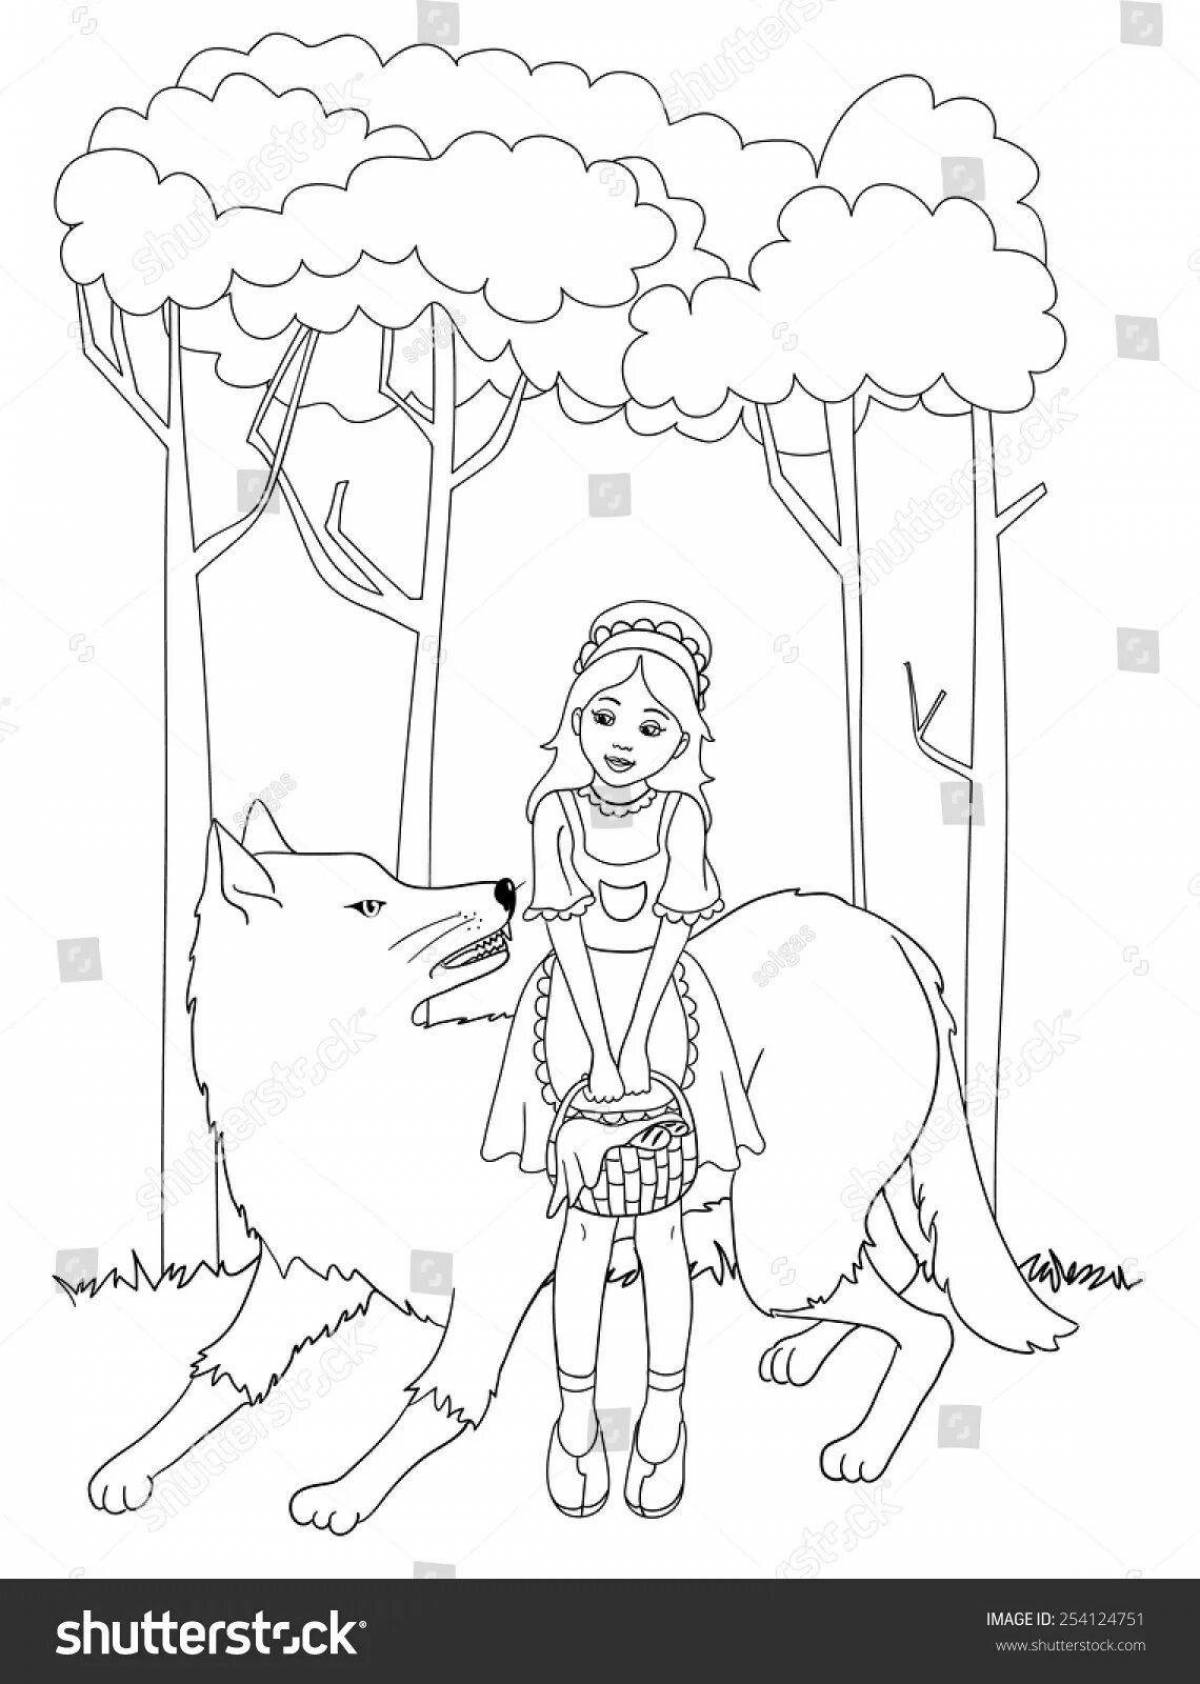 Coloring book playful gray wolf and little red riding hood